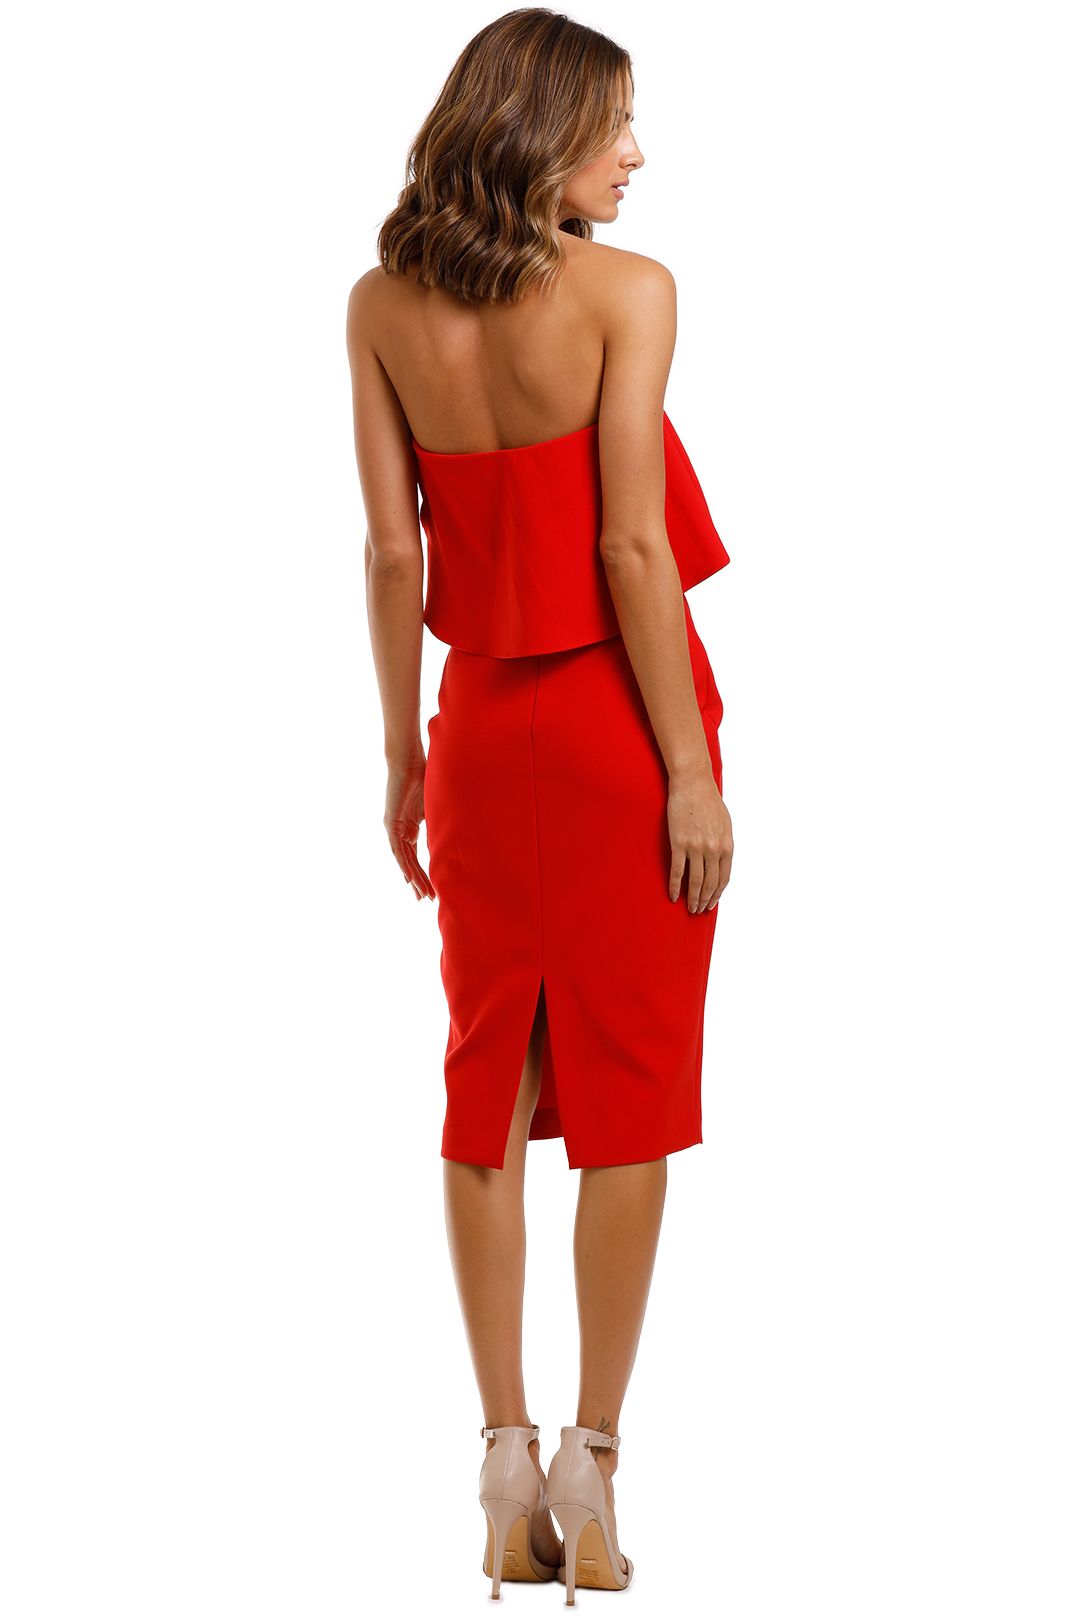 Likely NYC Driggs Dress Red Bodycon